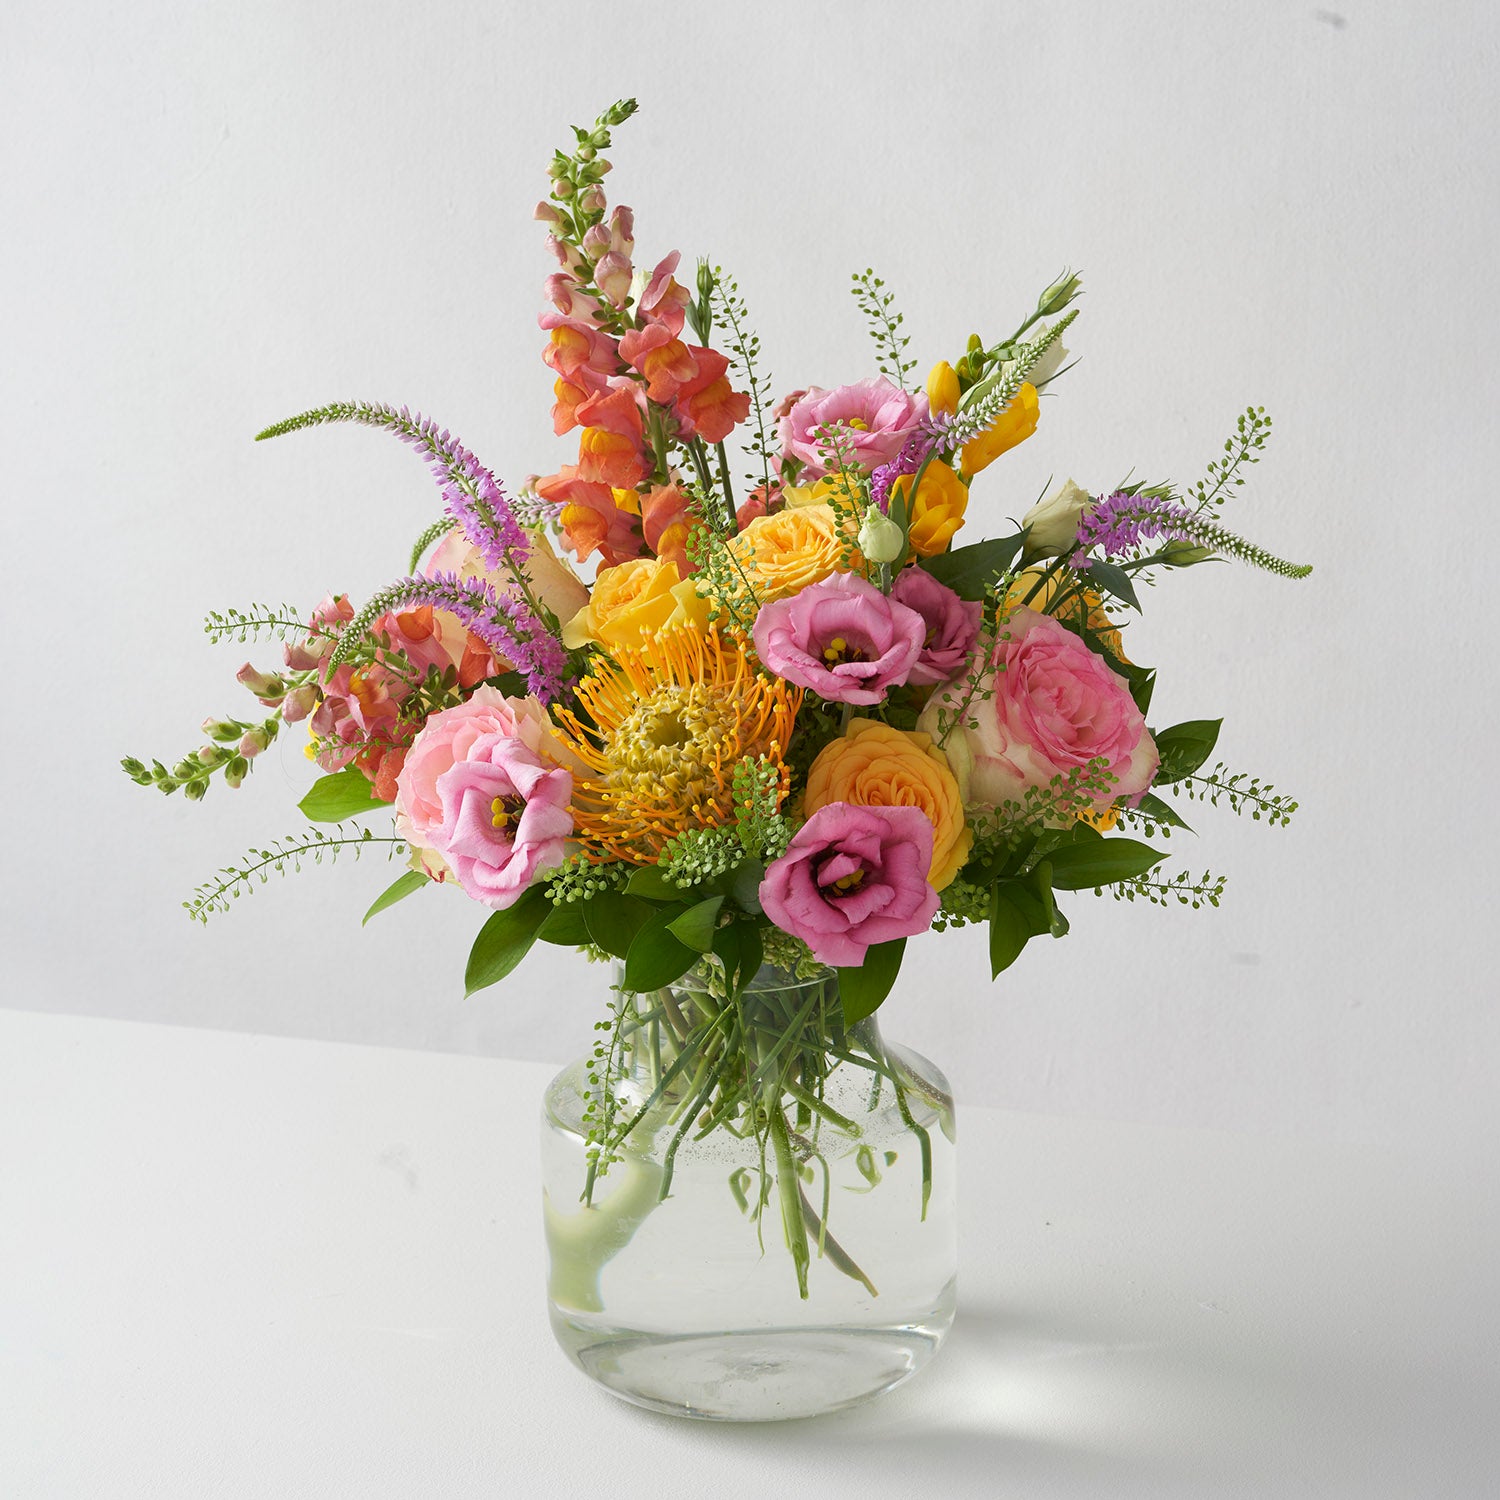 Arrangement of pink, yellow, and orange flowers in glass vase on white background.